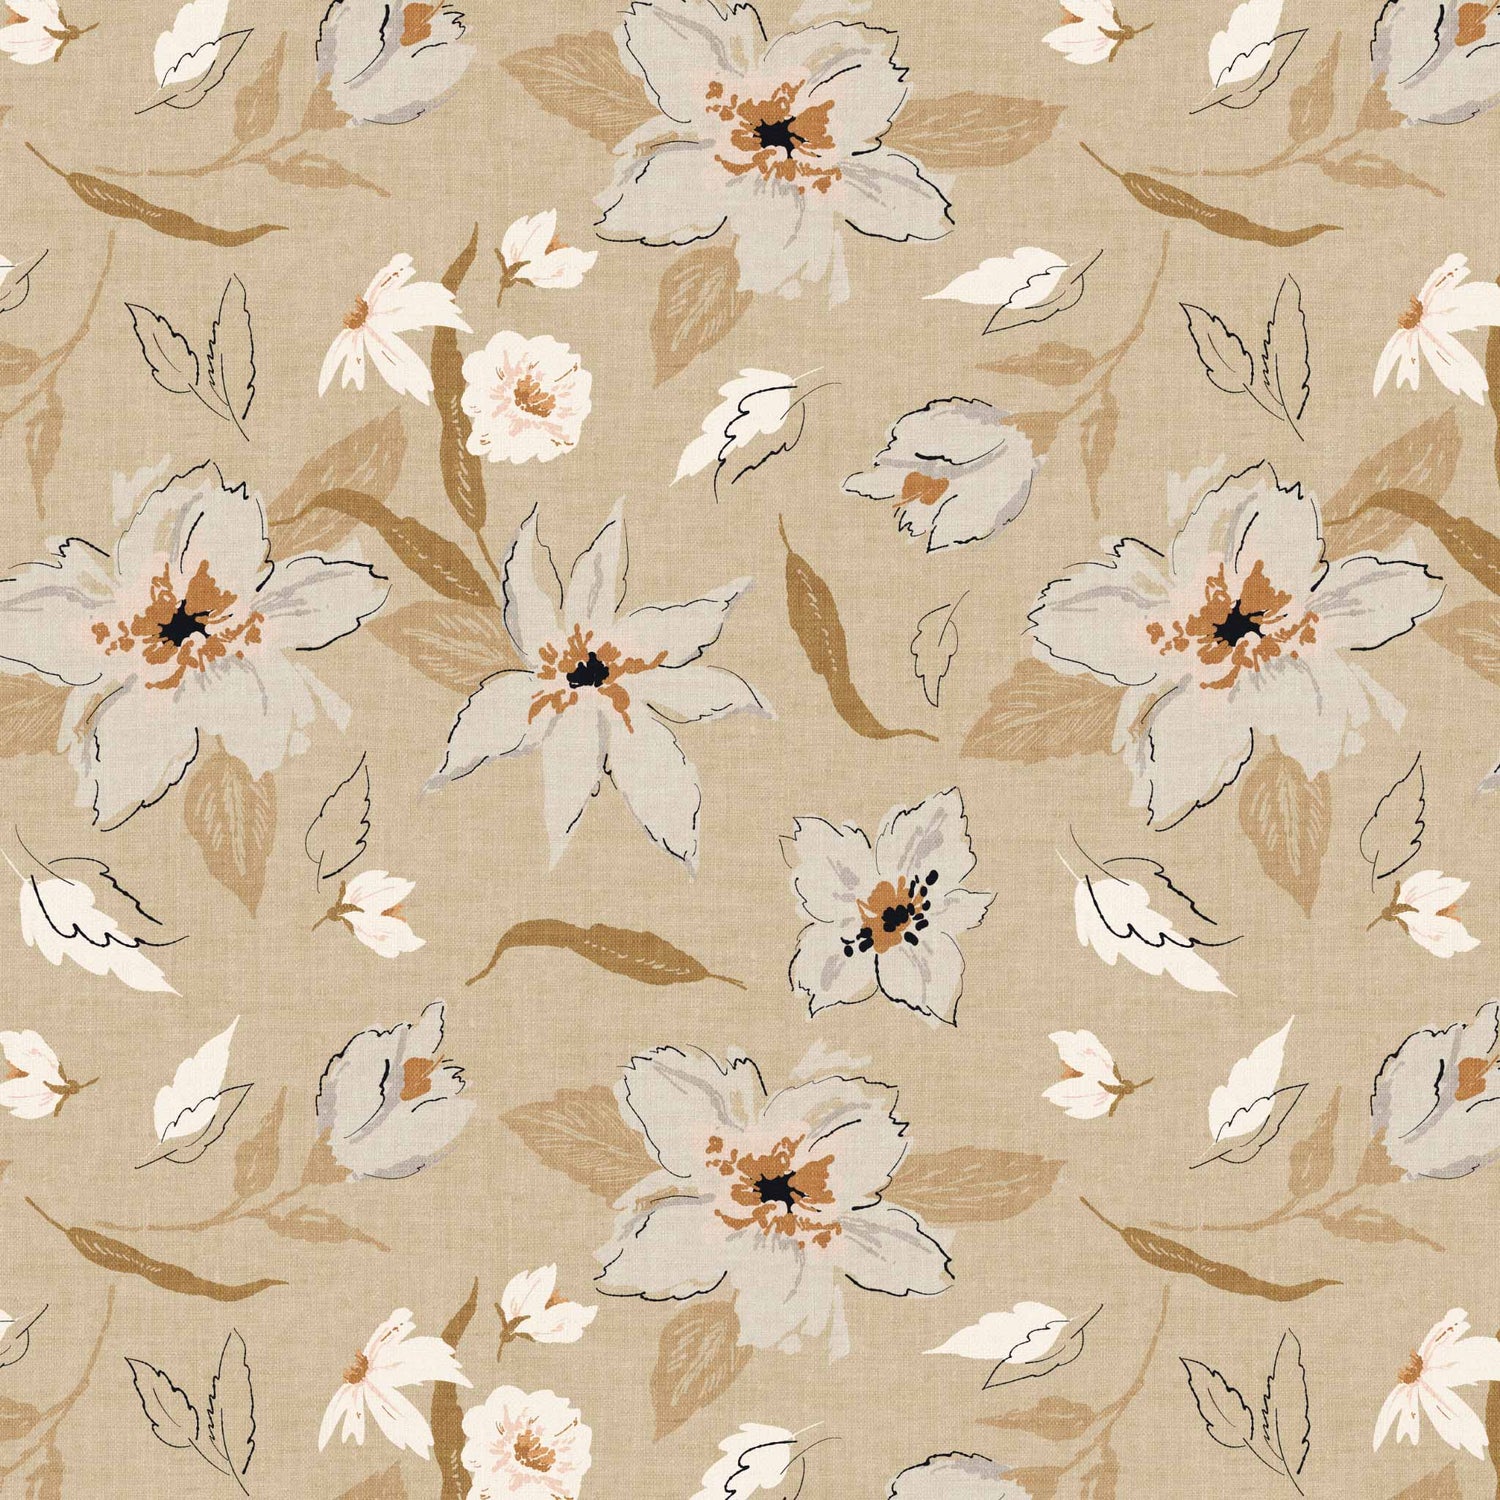 Bring a splash of natural beauty to your walls with this stunning Freehand Florals Wallpaper. Its vibrant tan tones and gorgeously done flowers.Bring a splash of natural beauty to your walls with this stunning Freehand Florals Wallpaper. Its vibrant tan tones and gorgeously done flowers will turn your walls into a literal work of art.